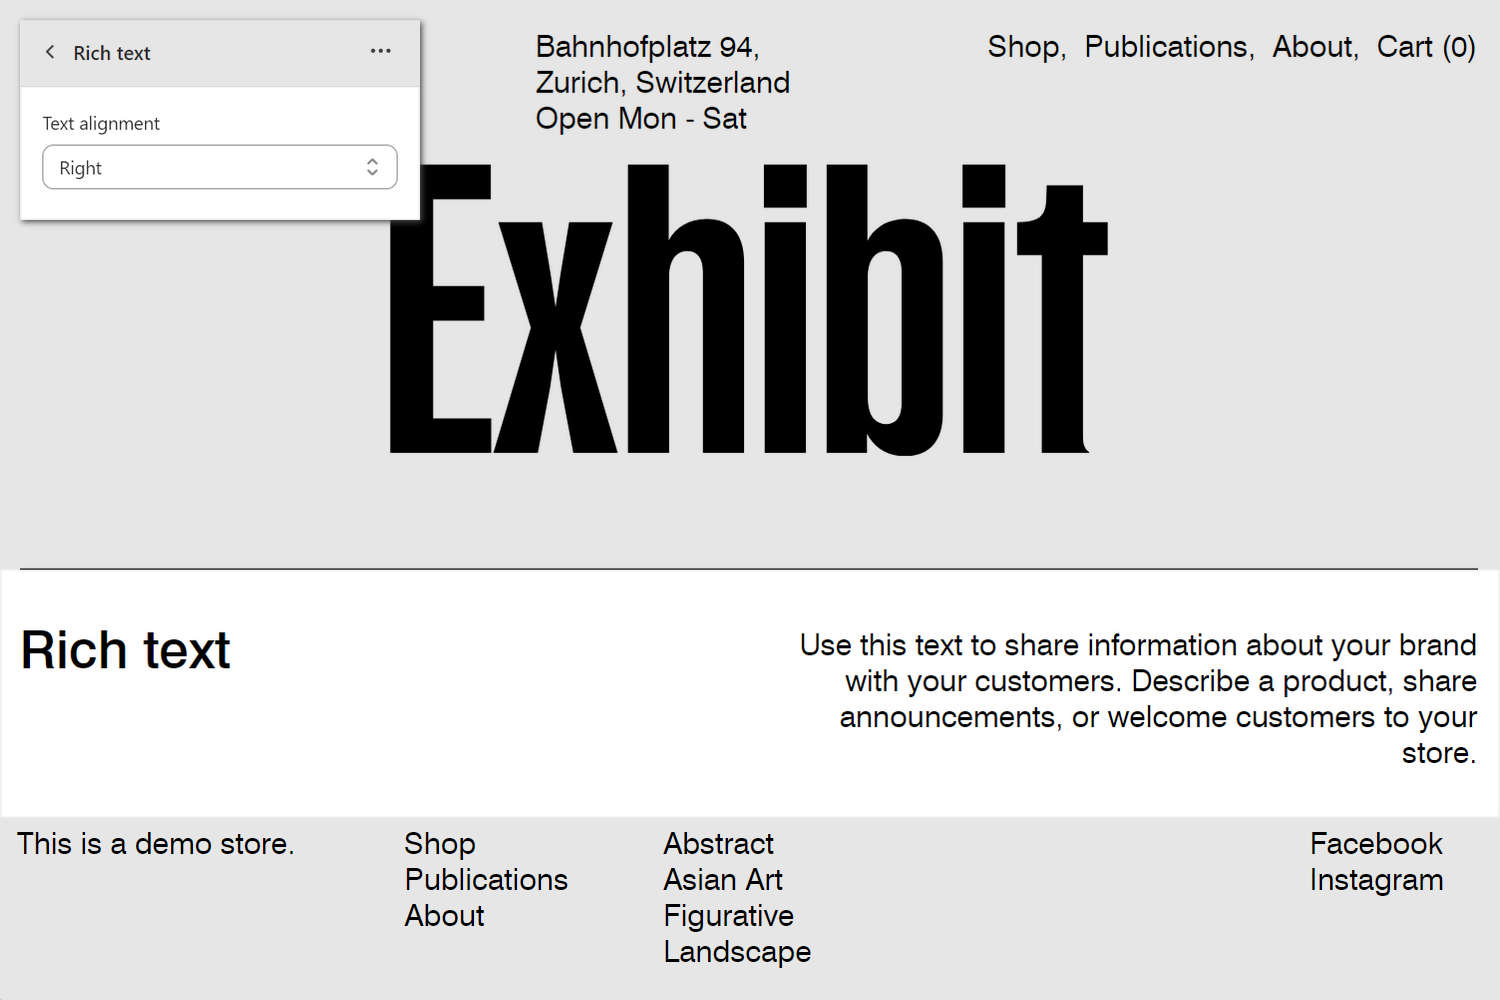 An example Rich text section on a store's Homepage.